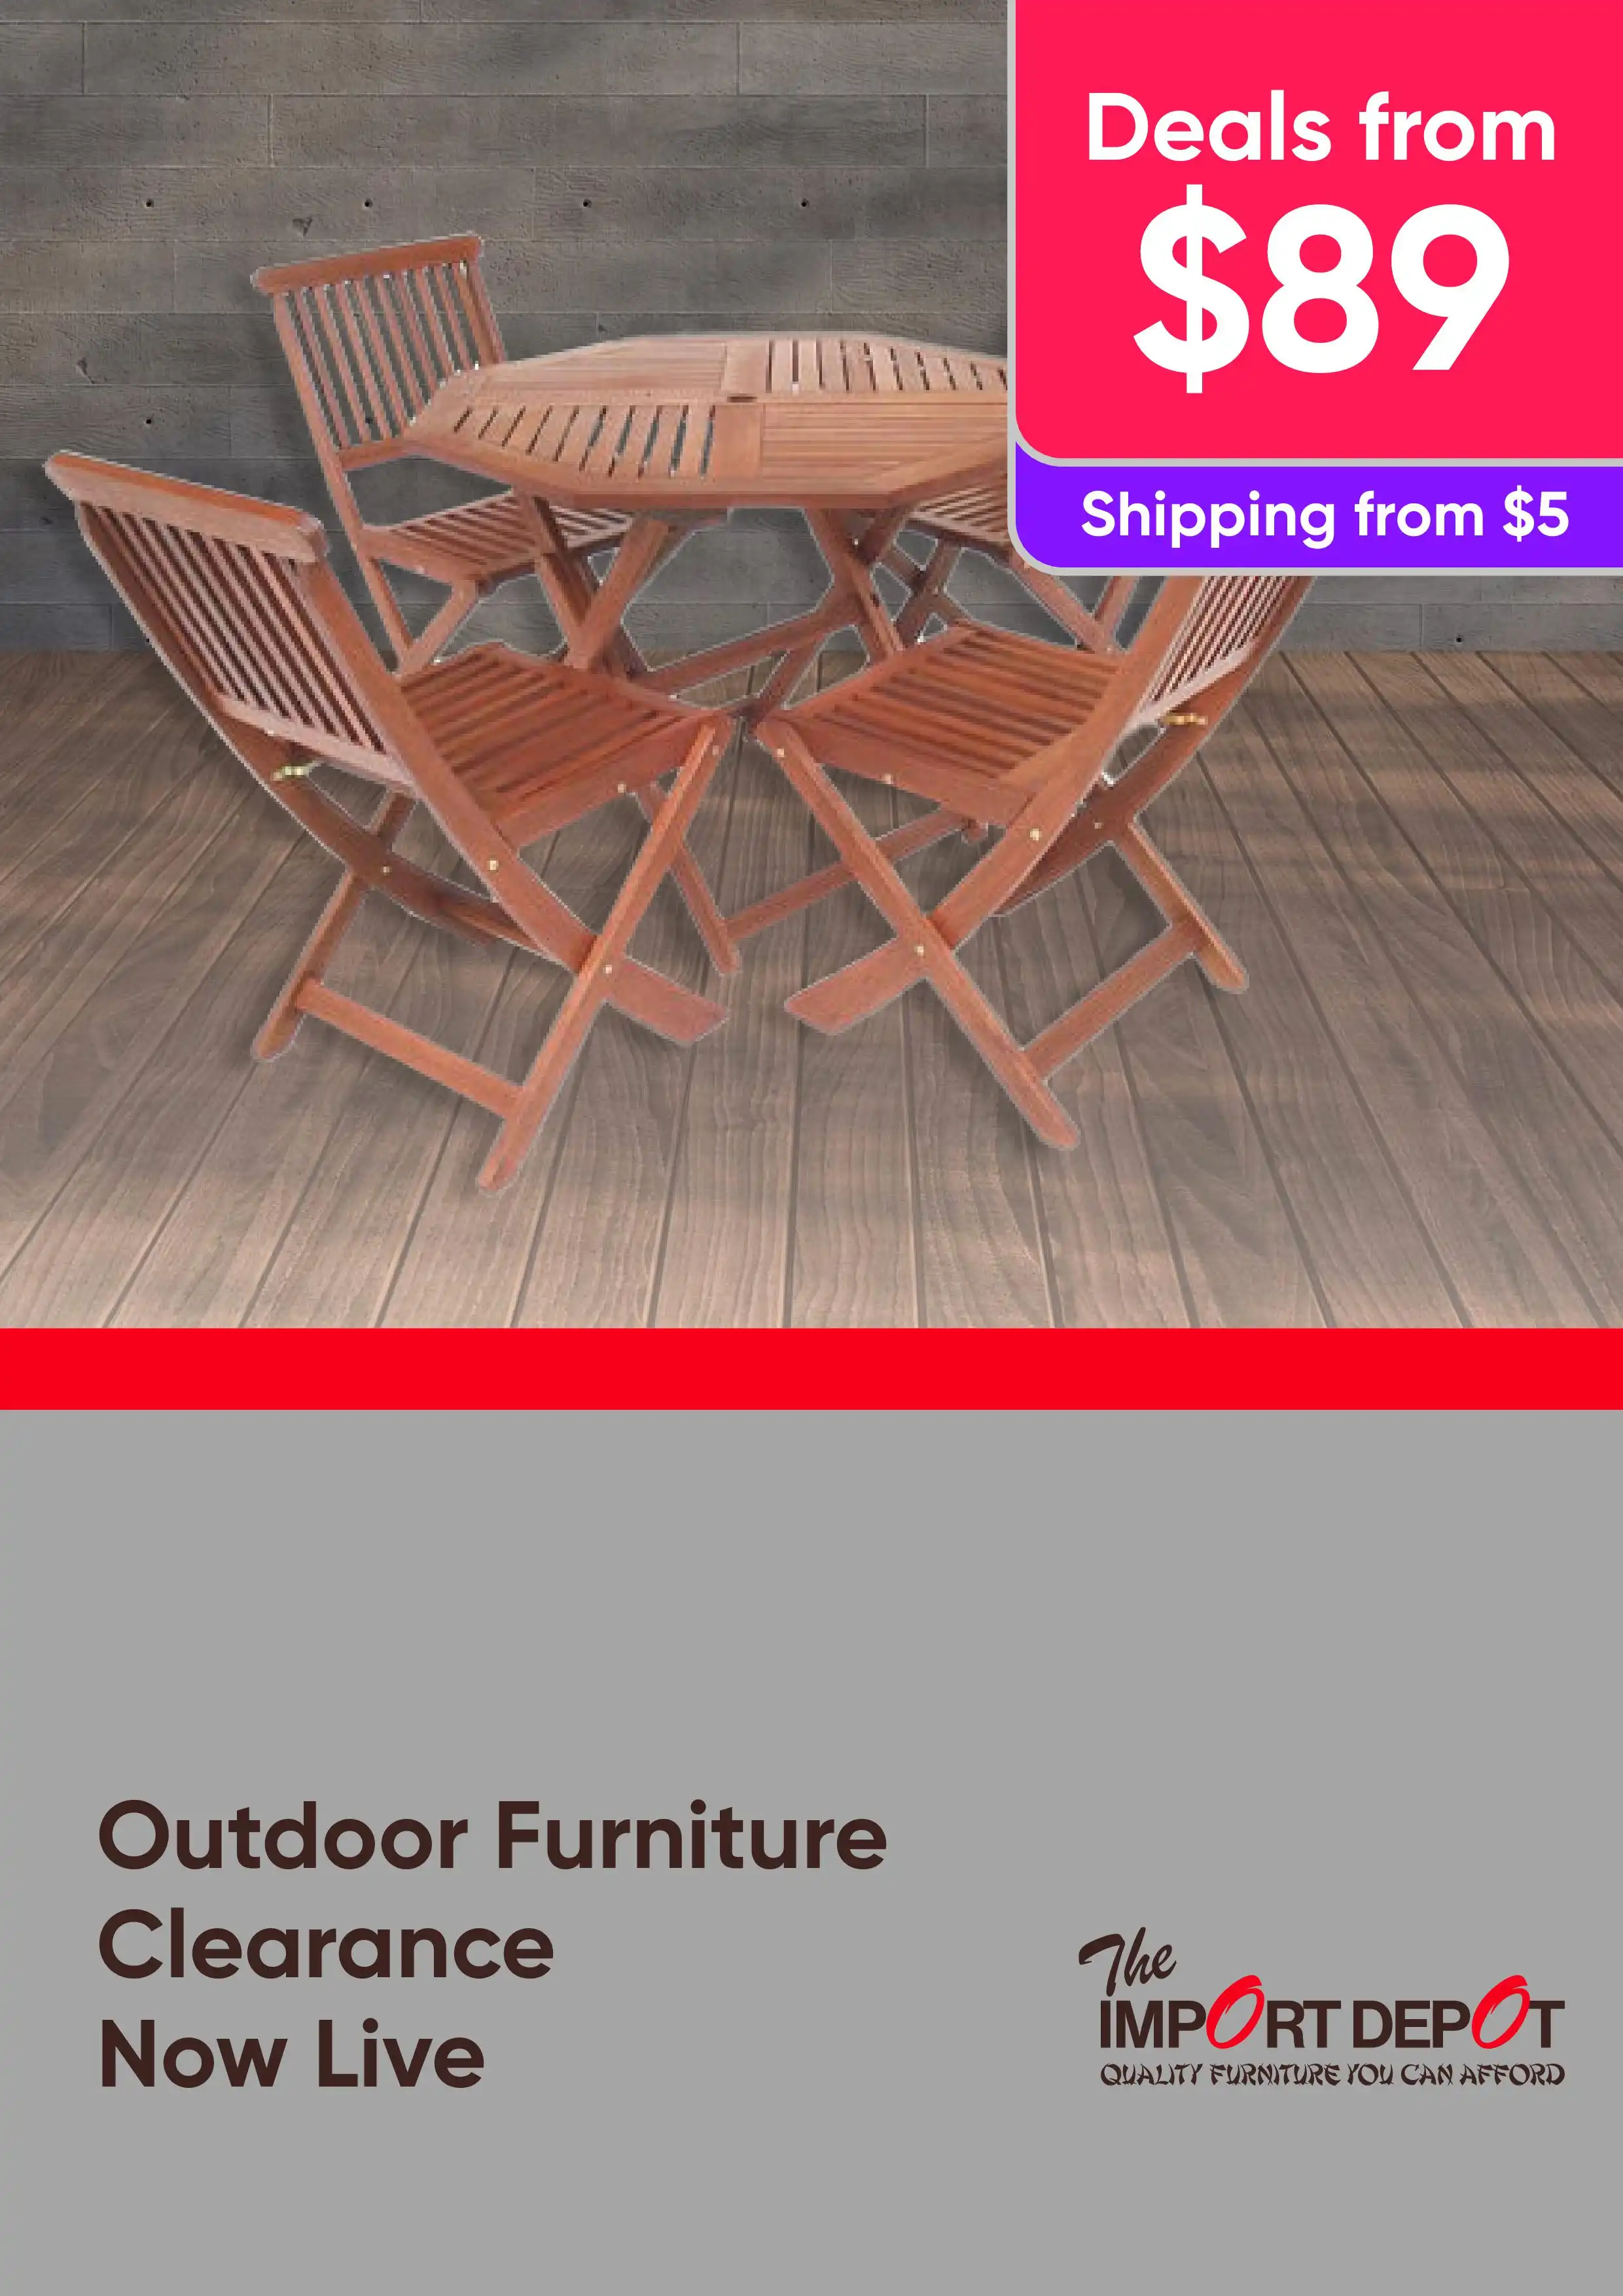 Outdoor Furniture Clearance now live